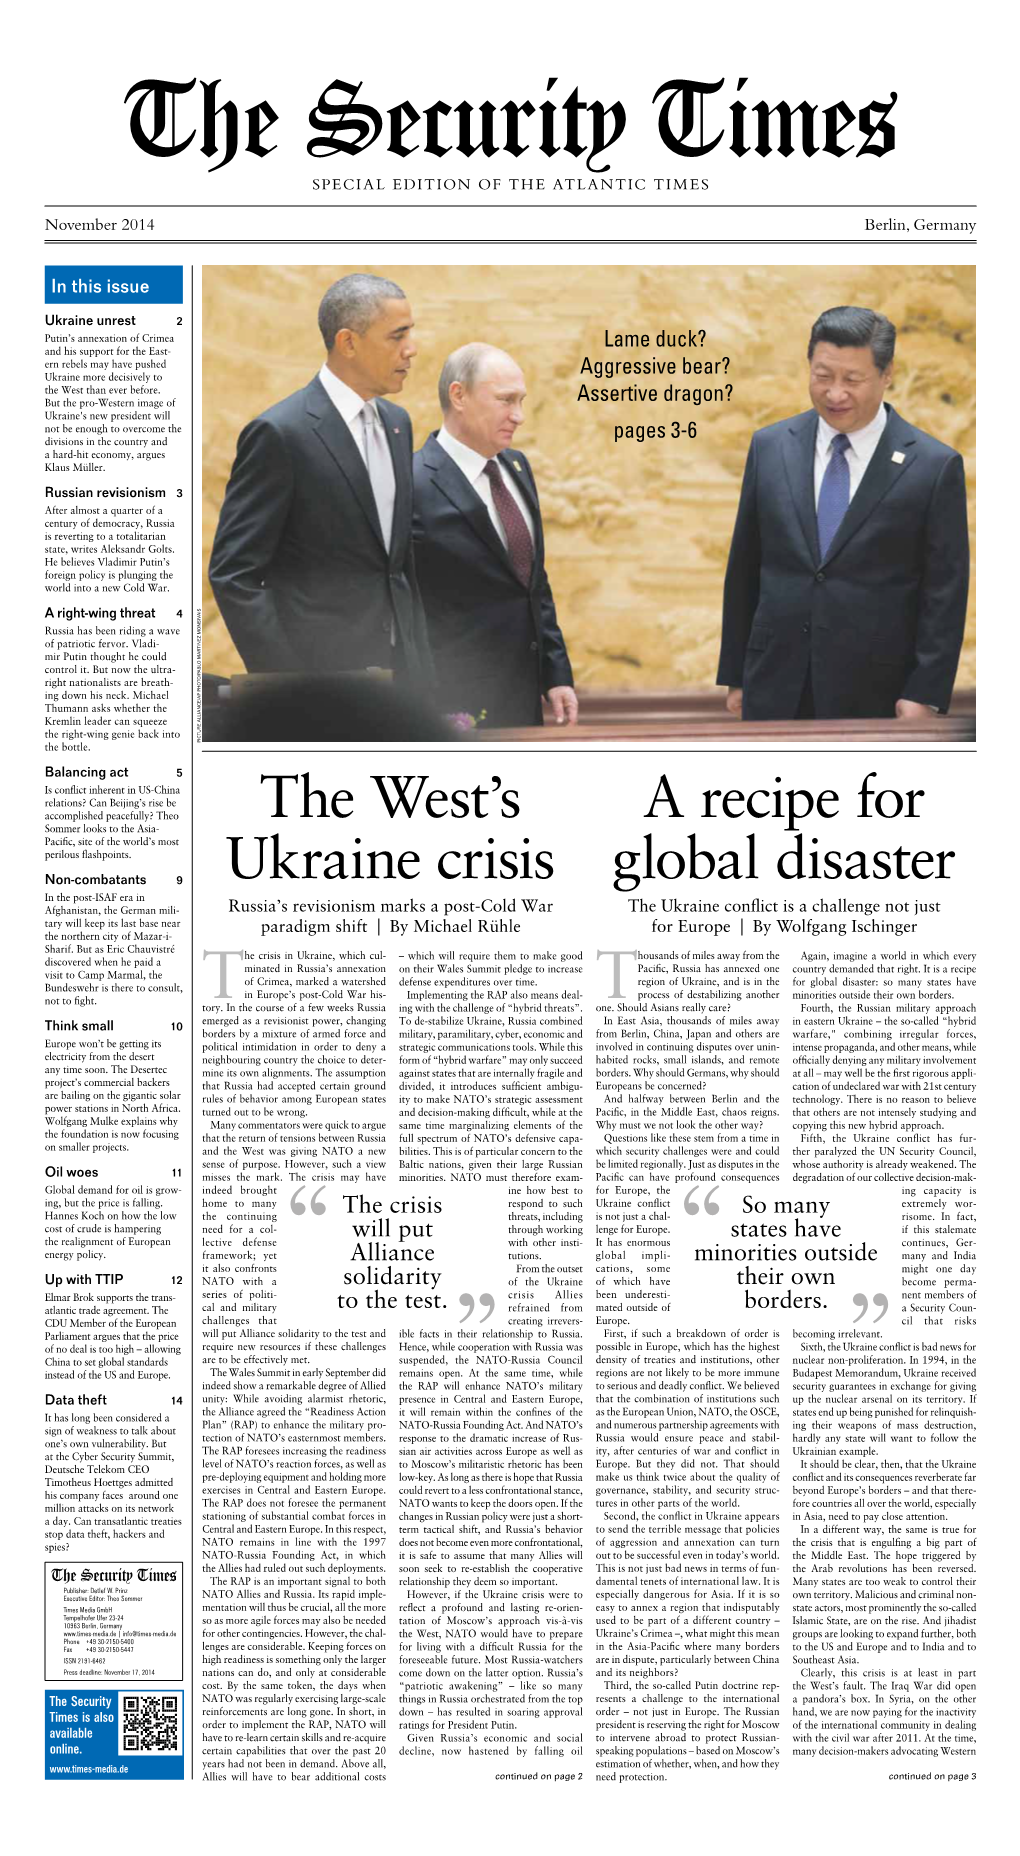 The West's Ukraine Crisis a Recipe for Global Disaster